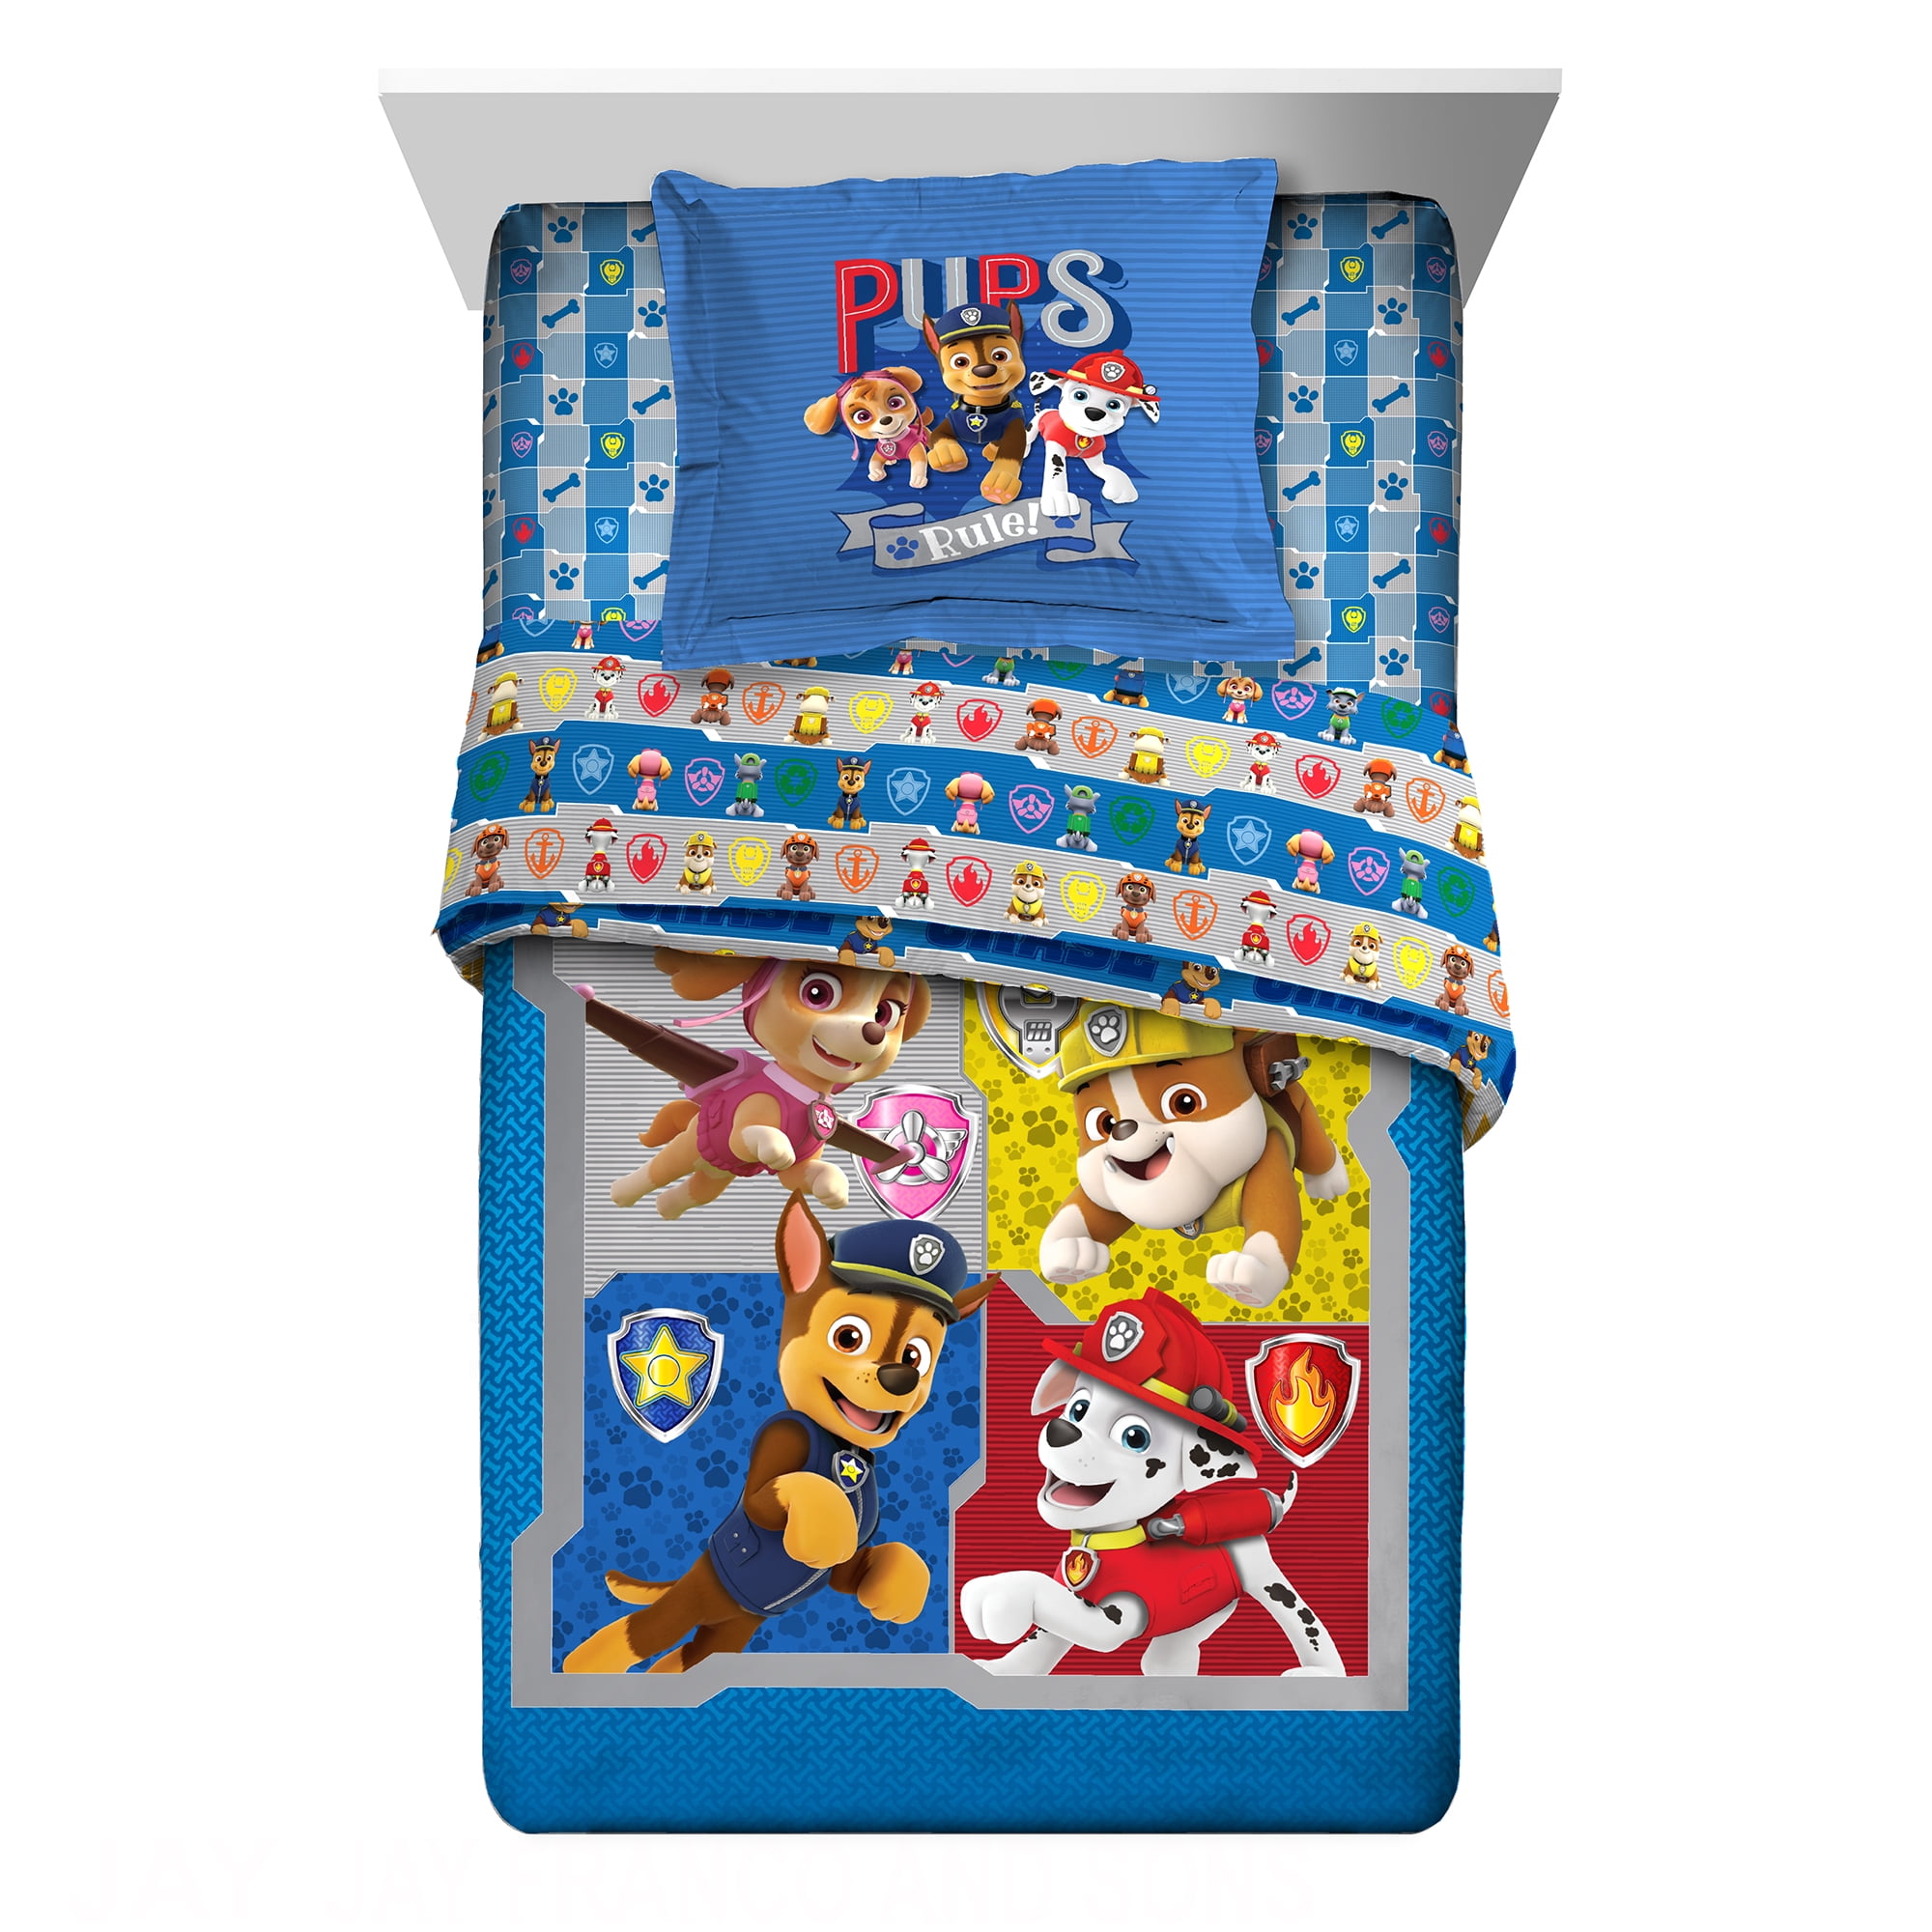 PERSONALISED  PINK CUSHION COVER PAW PATROL GIRLS  KIDS ROOM NEW FREE P&P 